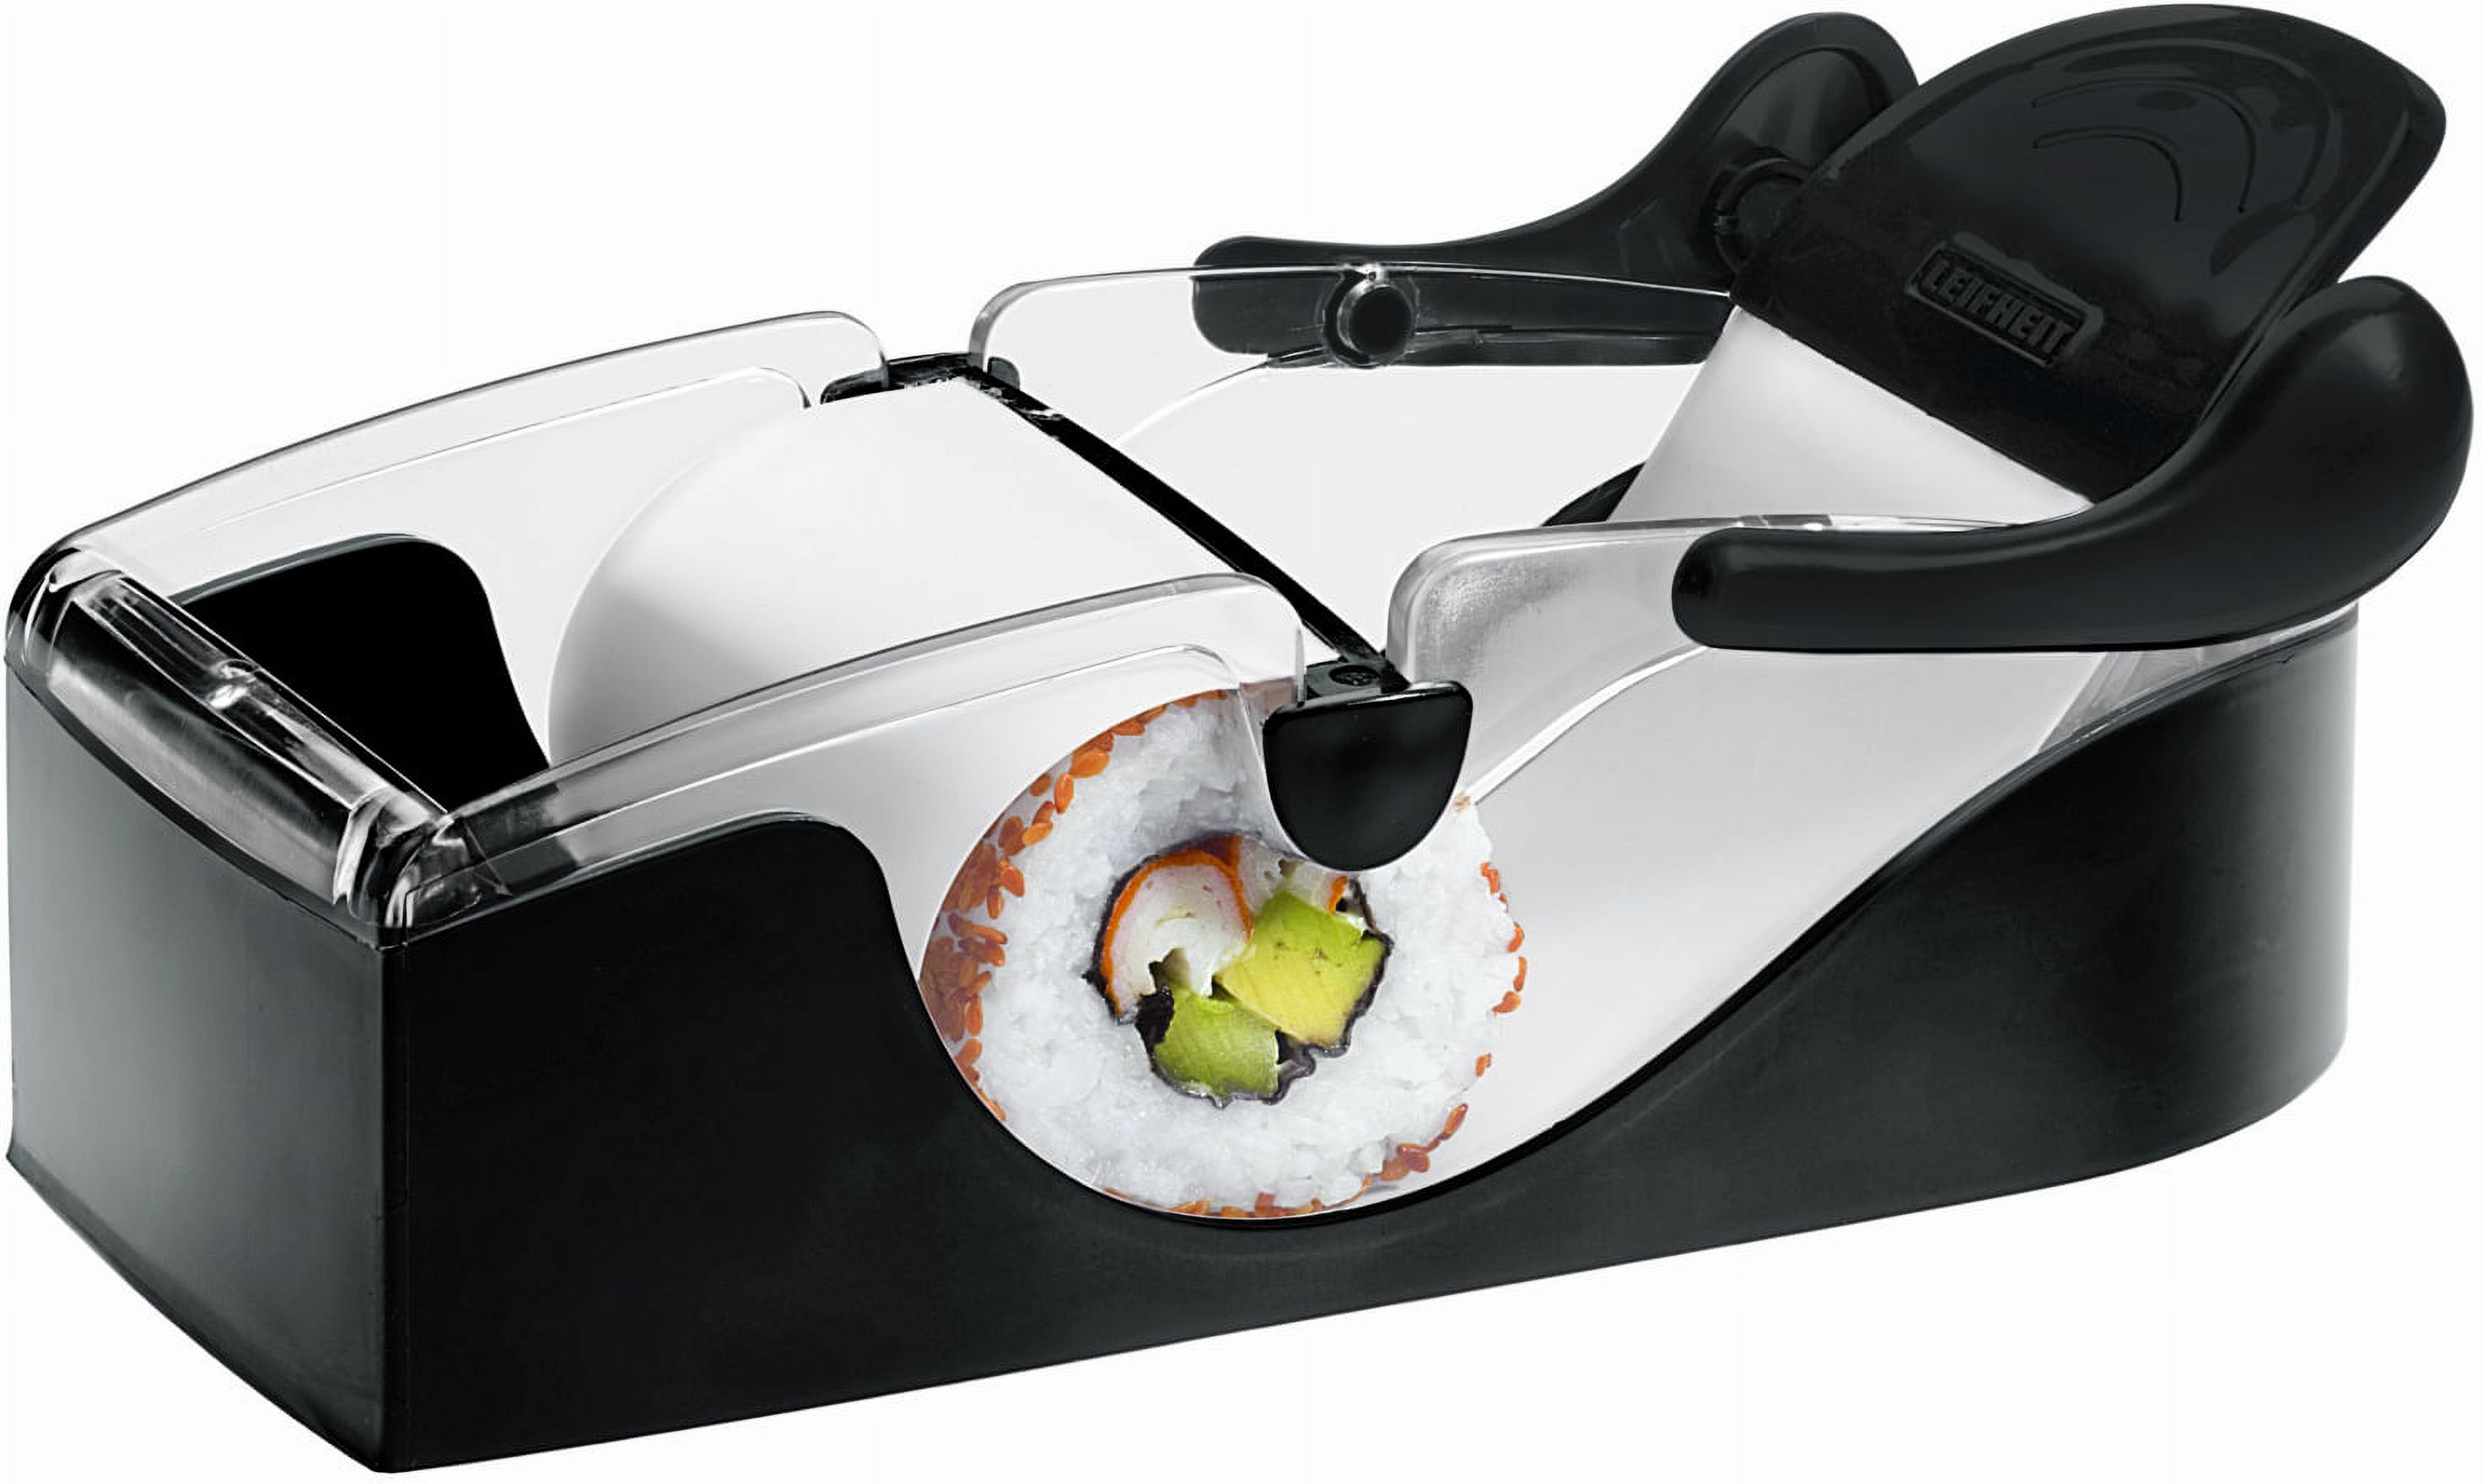 Sushi Roll Maker Tool - image 1 of 5